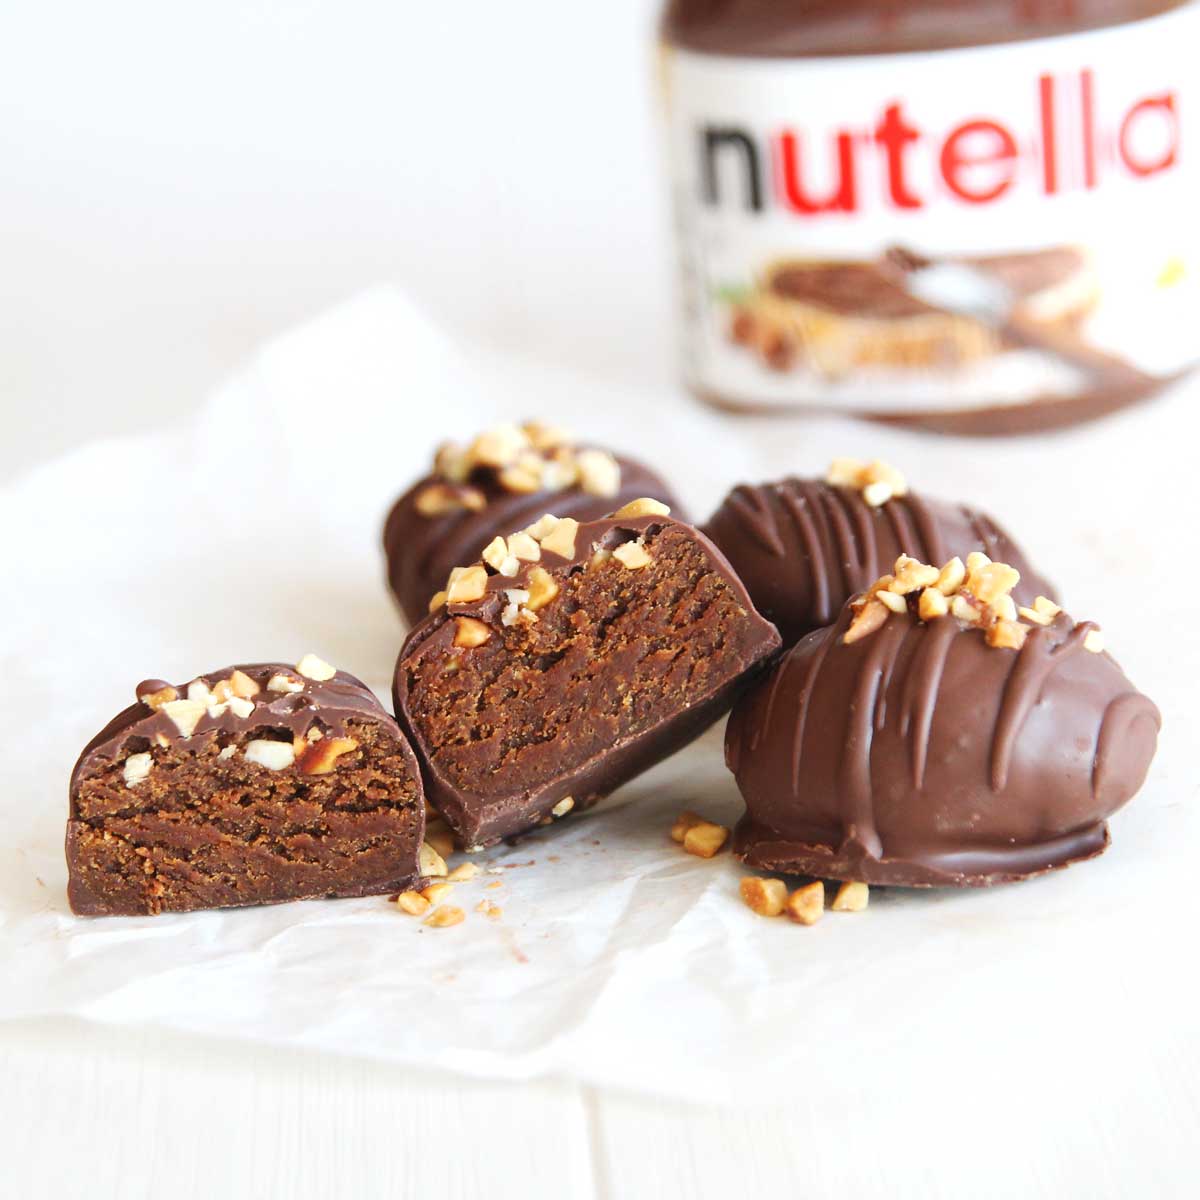 Healthier Nutella Chocolate Easter Eggs Made with PB Powder - Finger Sandwich